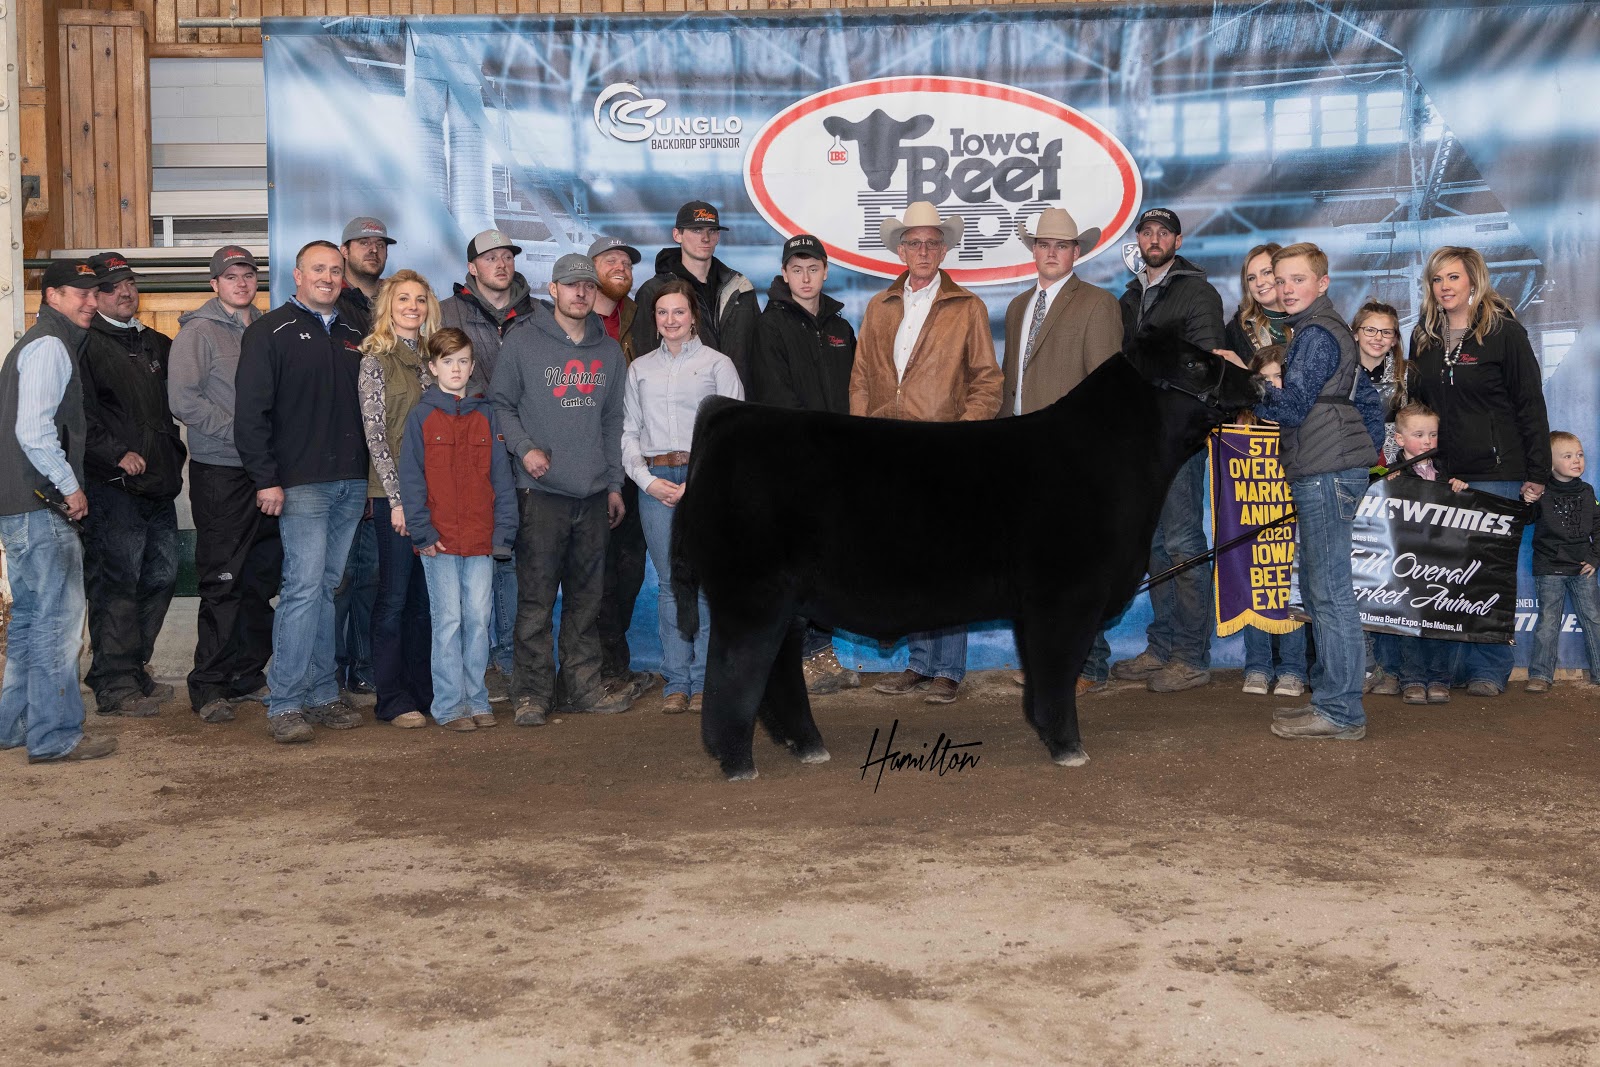 RCC Blog Updated Backdrop Pictures at Iowa Beef Expo!!